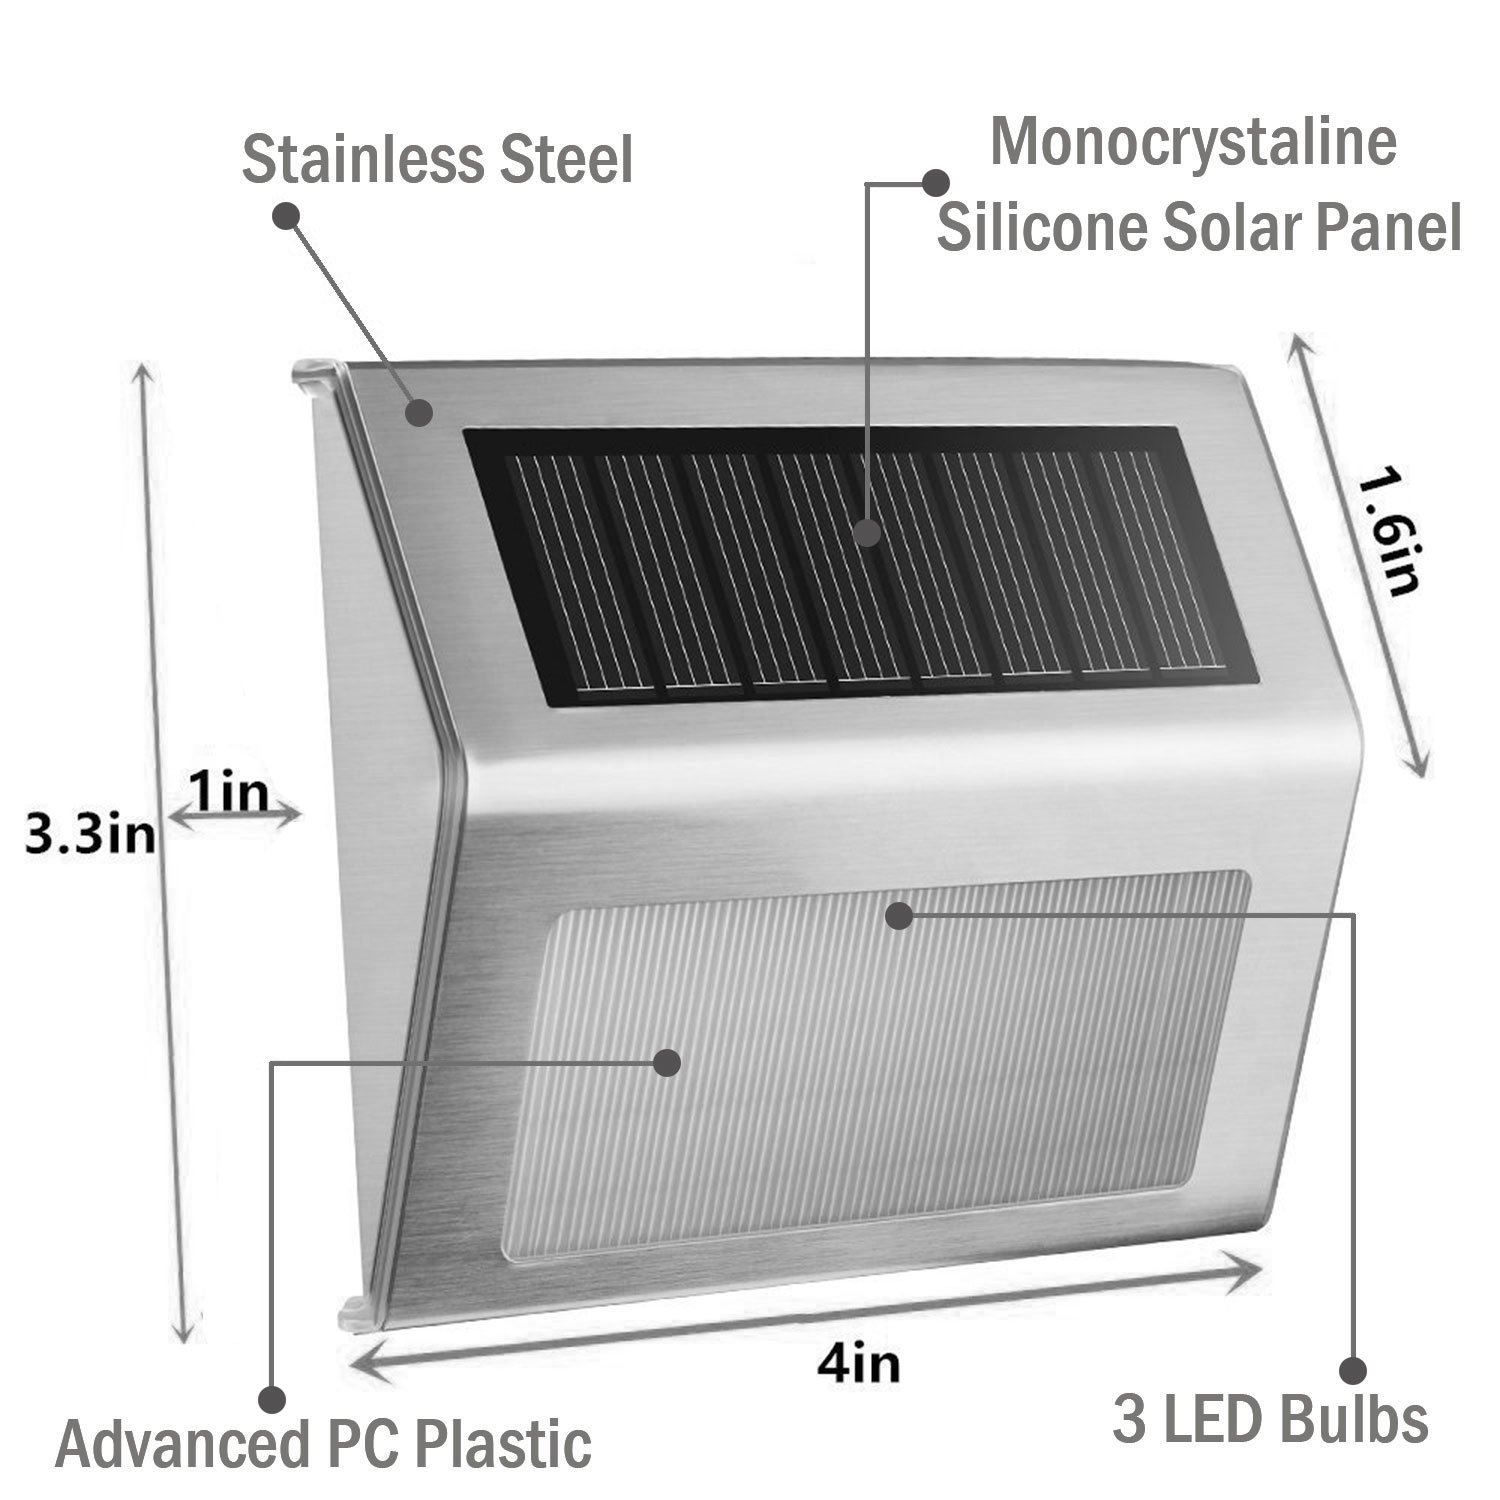 Solar Stair Light, EpicGadget Waterproof Outdoor LED Step Lighting 3 LED Solar Powered Step Lights Stainless Steel Outdoor Lighting for Steps Paths Patio Stairs (8 Pack) - image 2 of 5